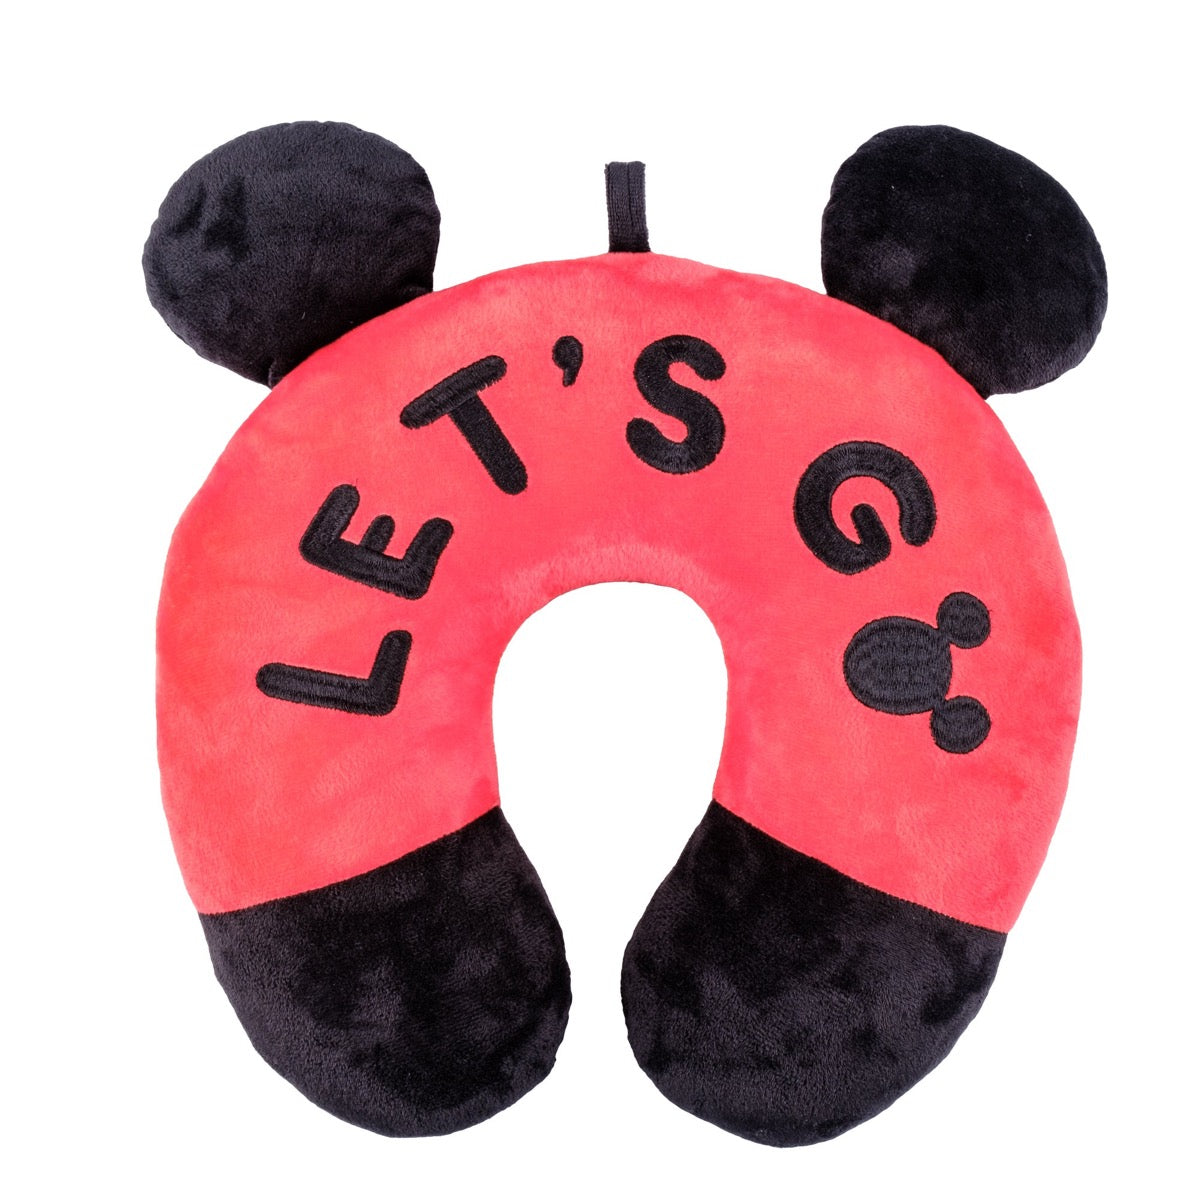 Disney Mickey Mouse let's go travel neck pillow red black